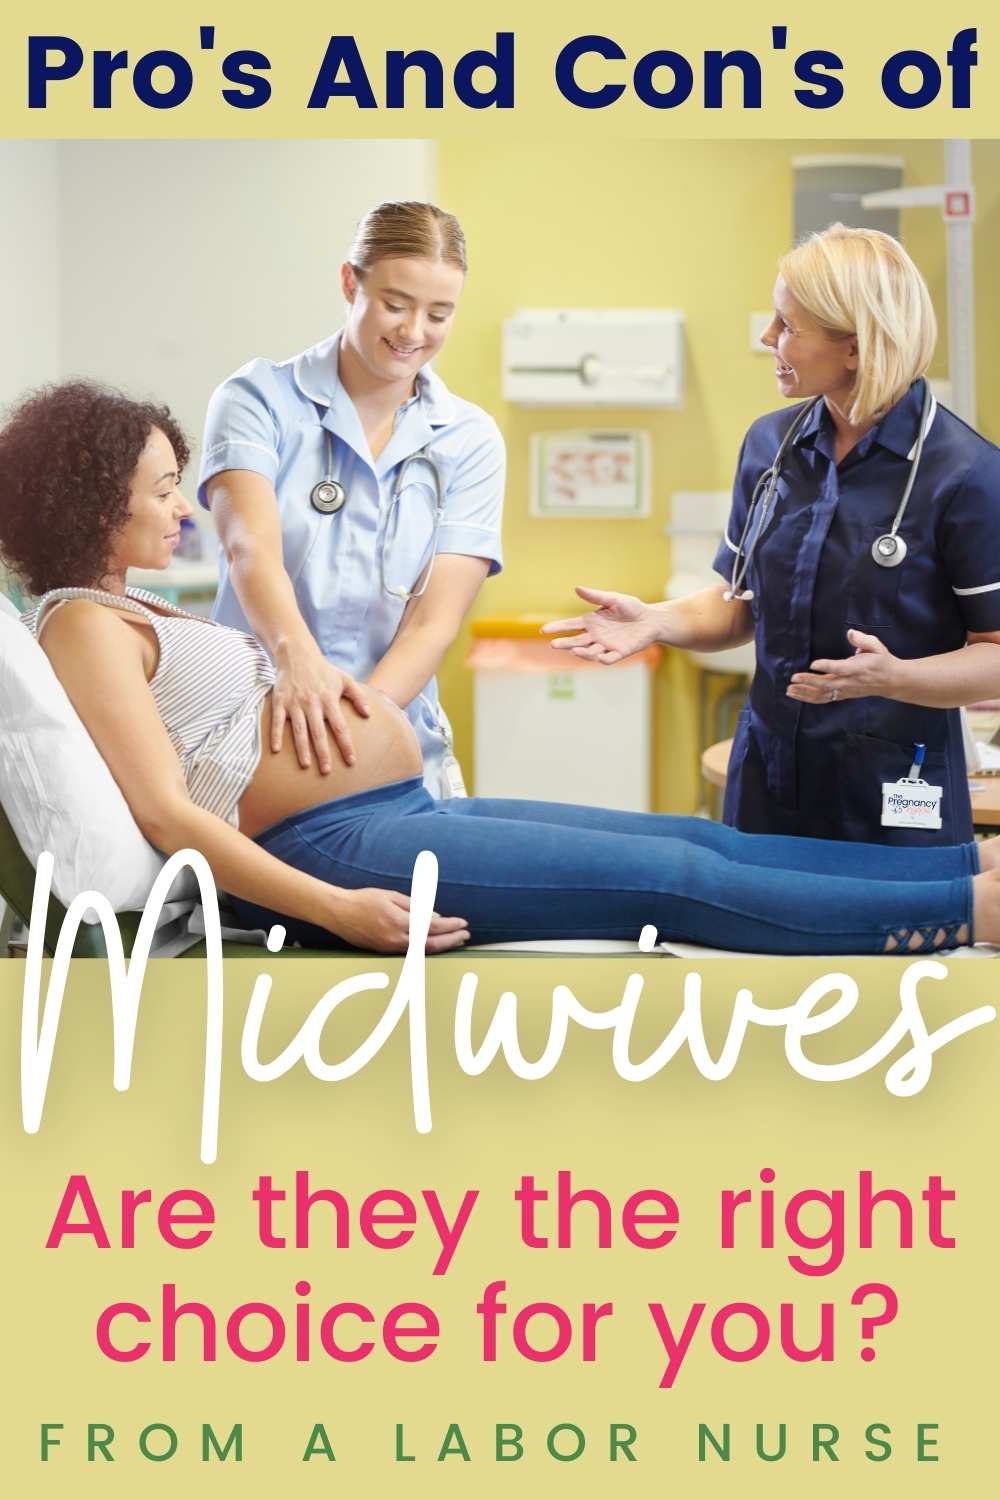 Making the decision about who will be your care provider during childbirth can be a daunting task. Here, we outline some of the pros and cons of midwives vs doctors so that you can make an informed decision.